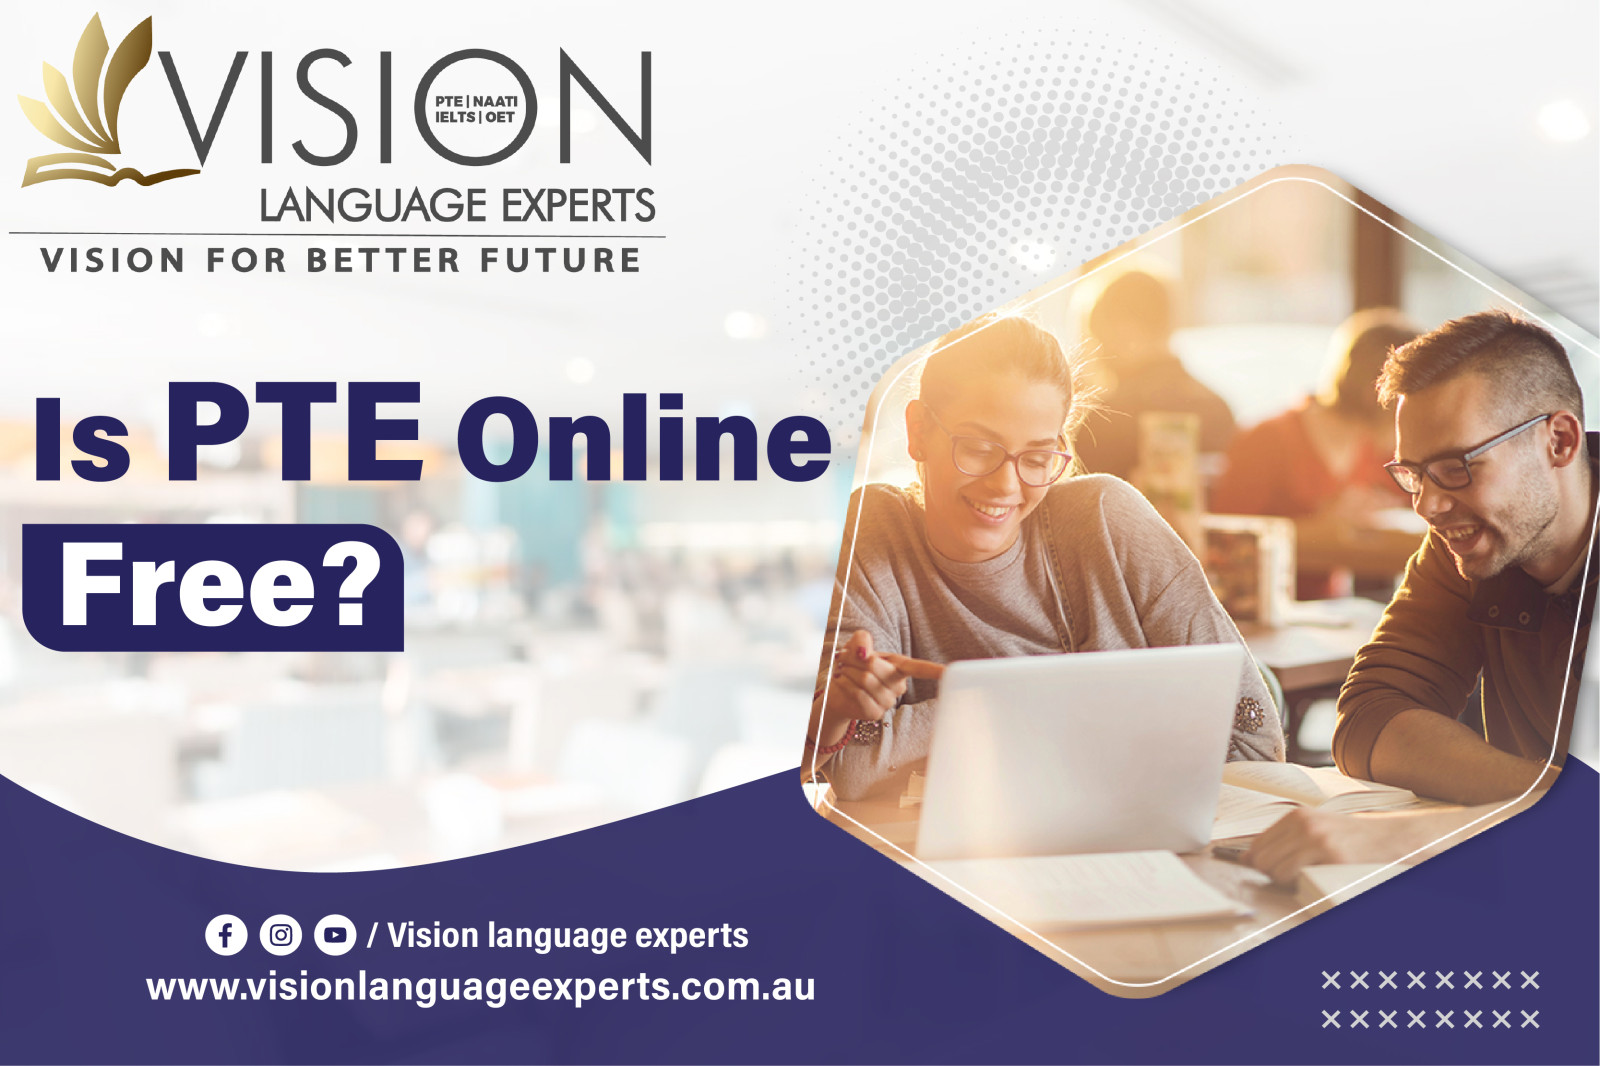 How can I learn PTE online for free?